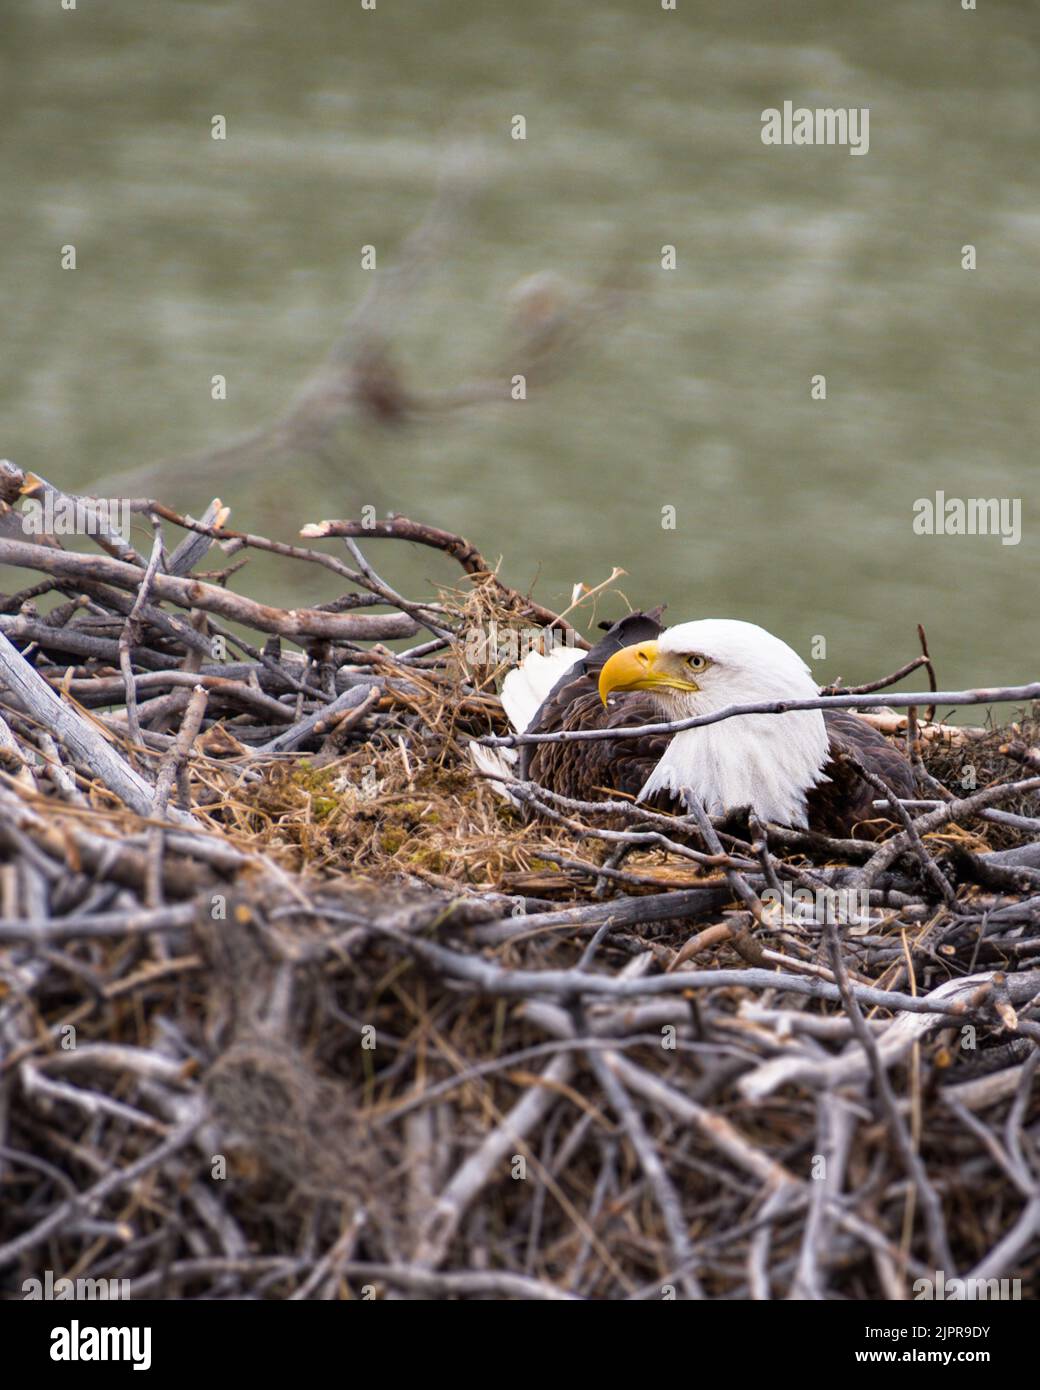 Bald eagle sitting in its nest, surrounded by sticks Stock Photo